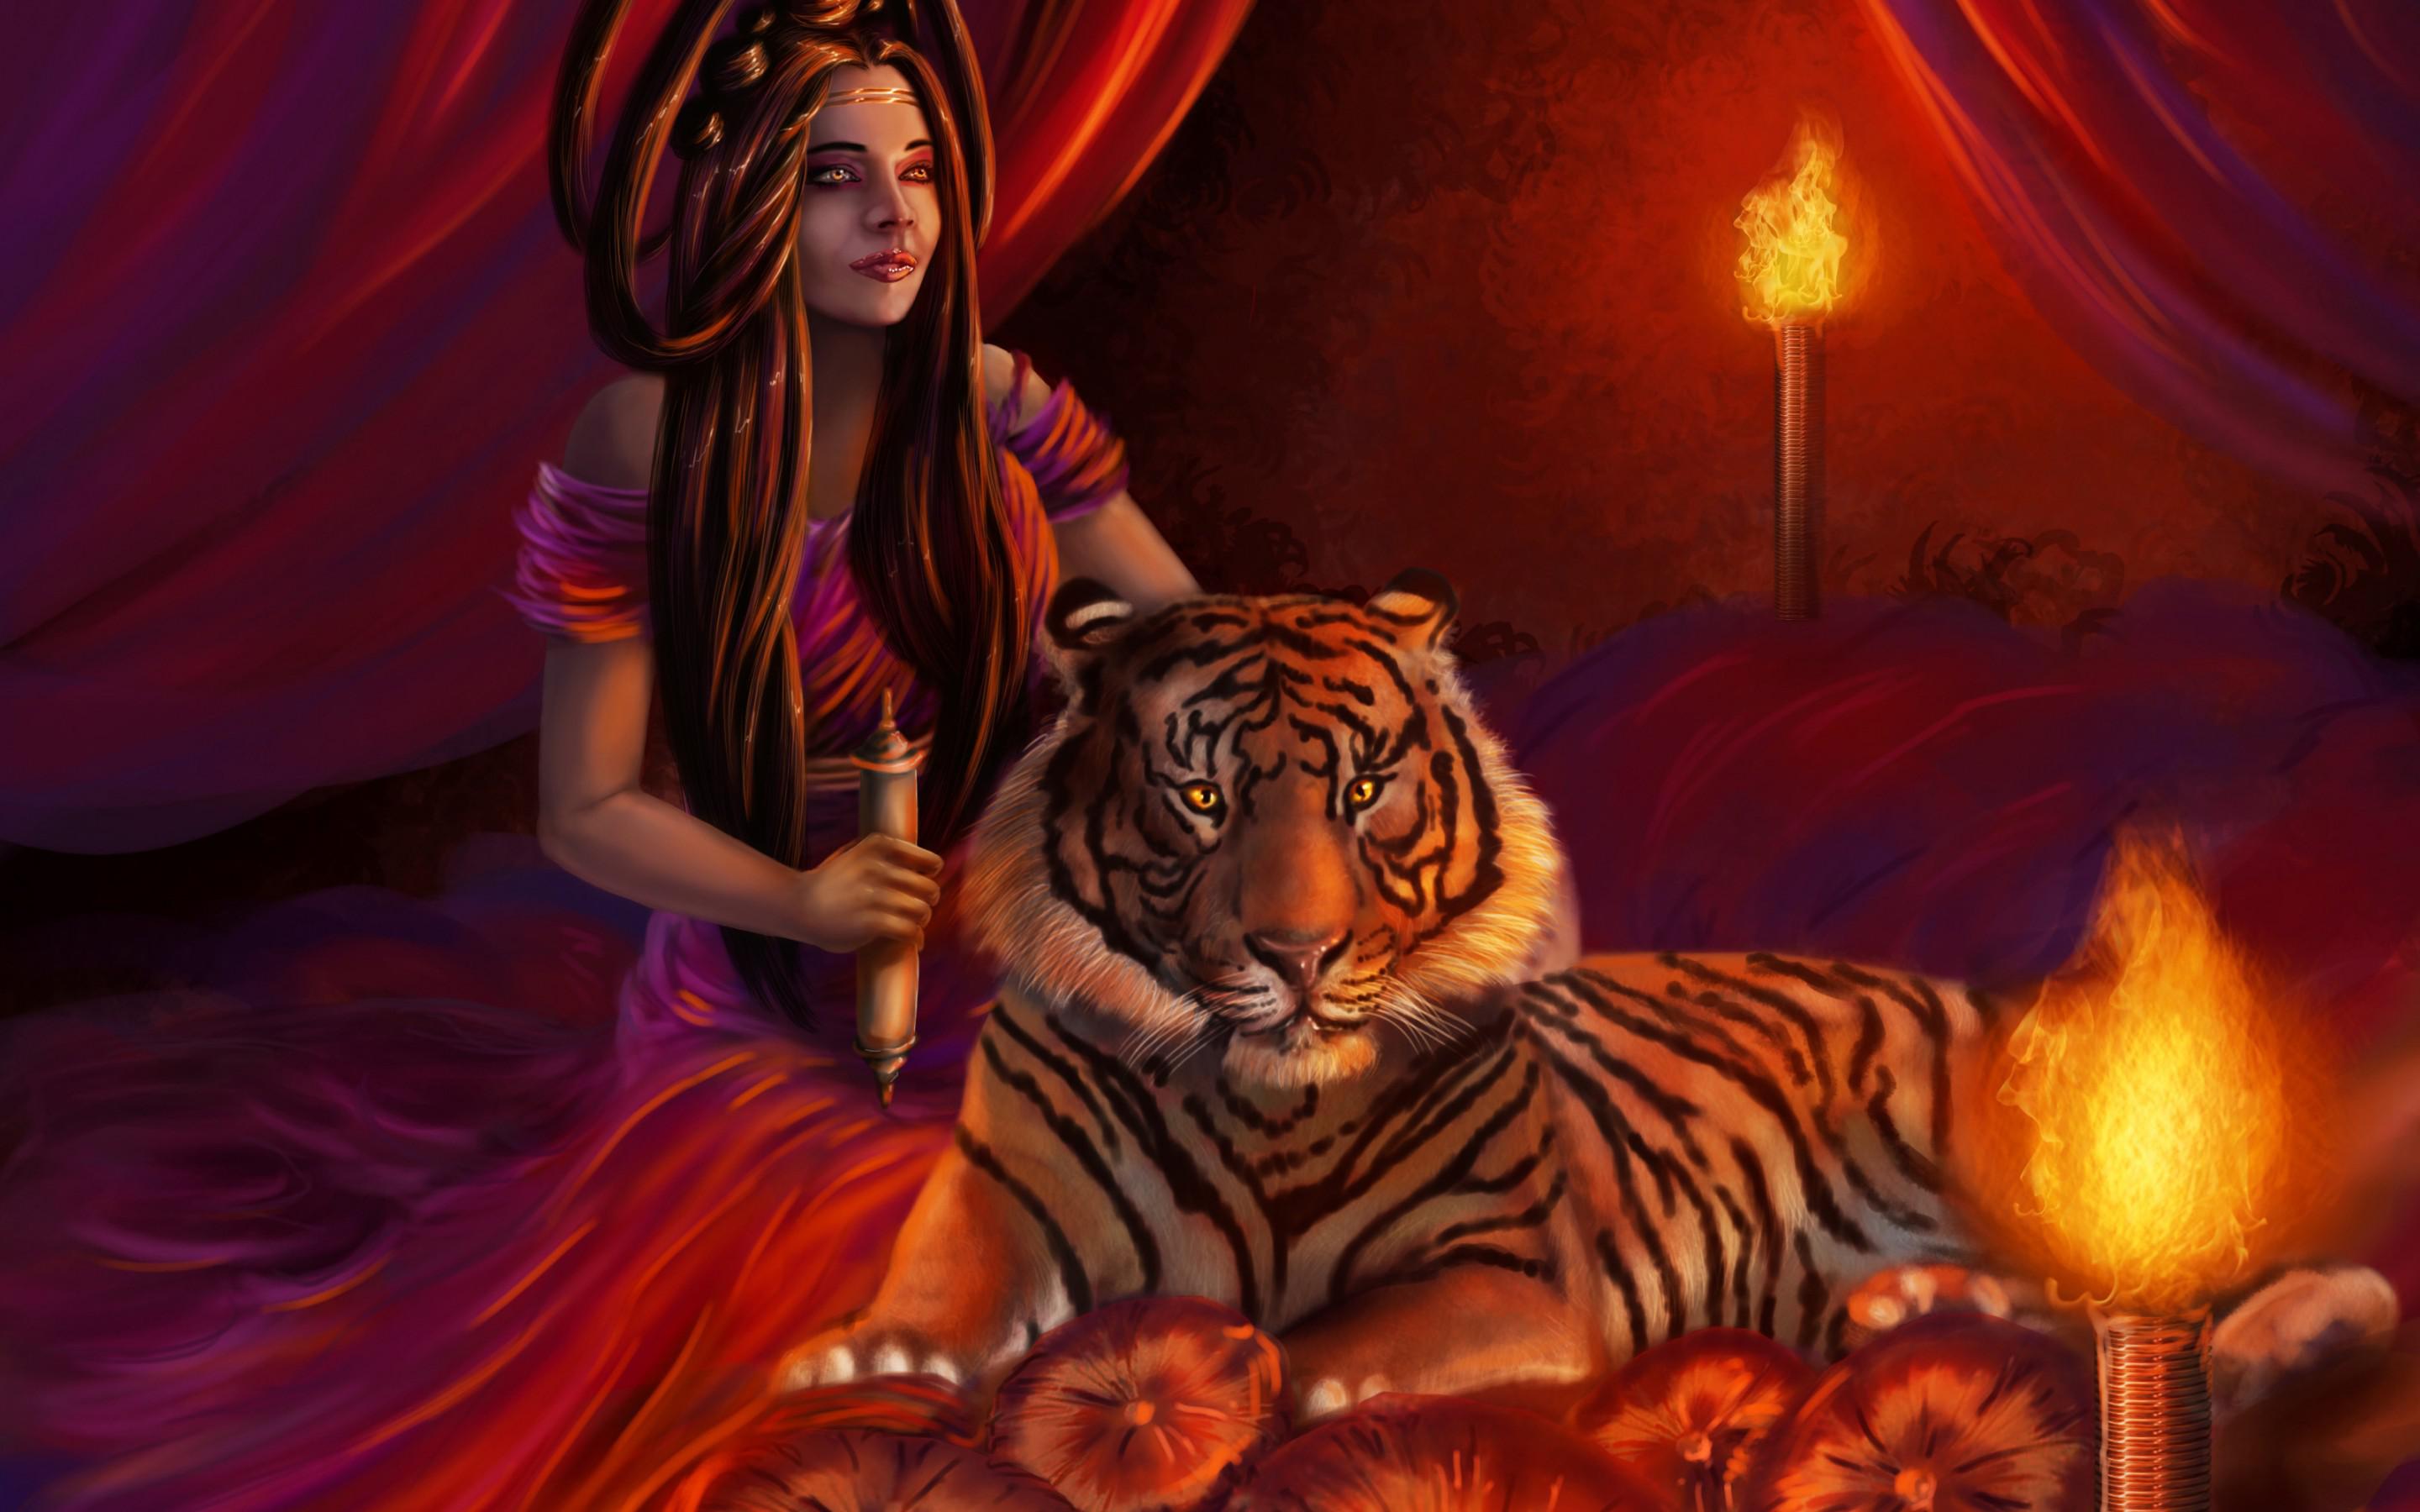 https://www.wallpapers13.com/wp-content/uploads/2015/11/Woman_with_tiger-1476479.jpg